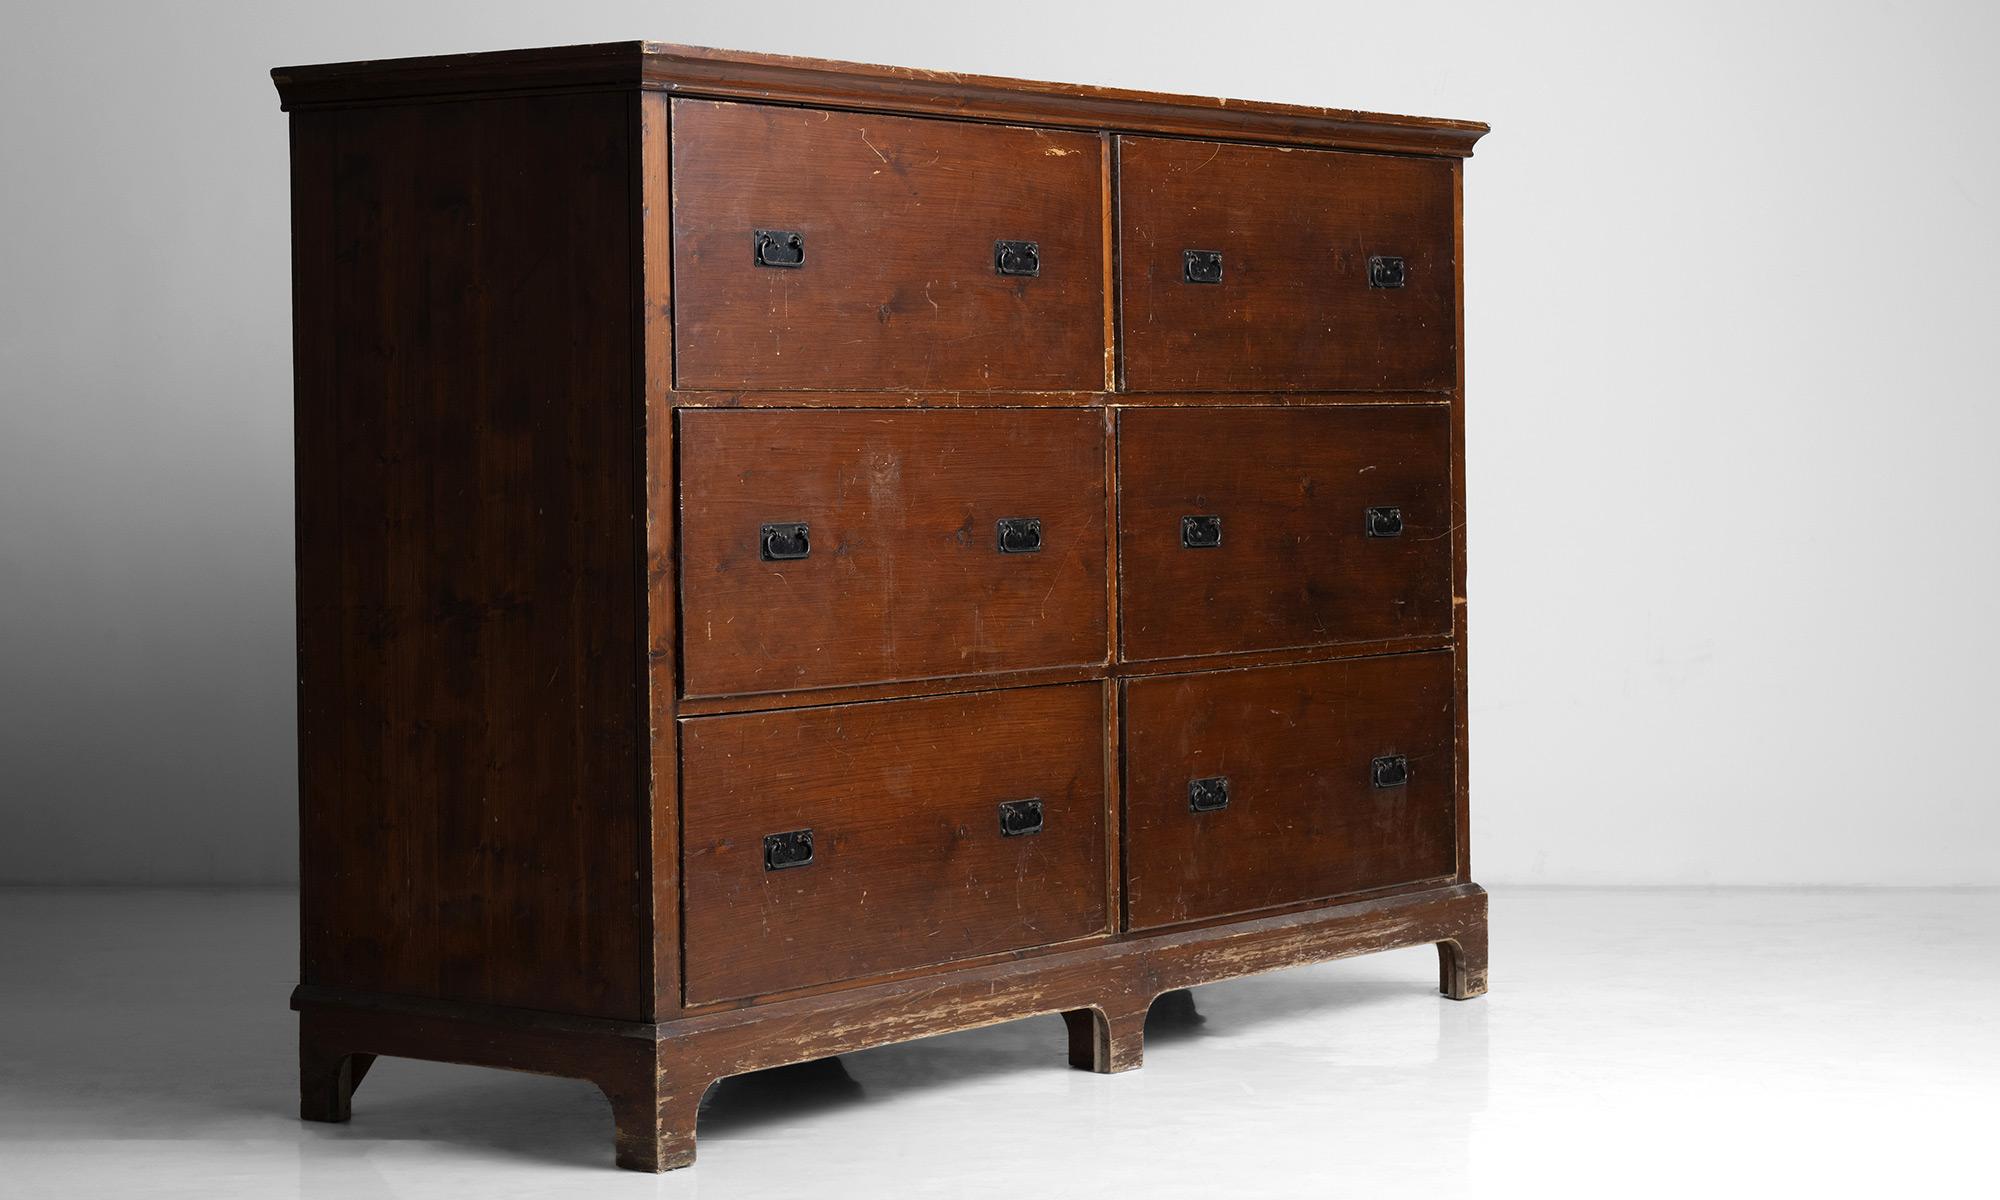 Massive chest of drawers, 97 Inches, England circa 1890

Large-scale chest in original finish

Measures: 97